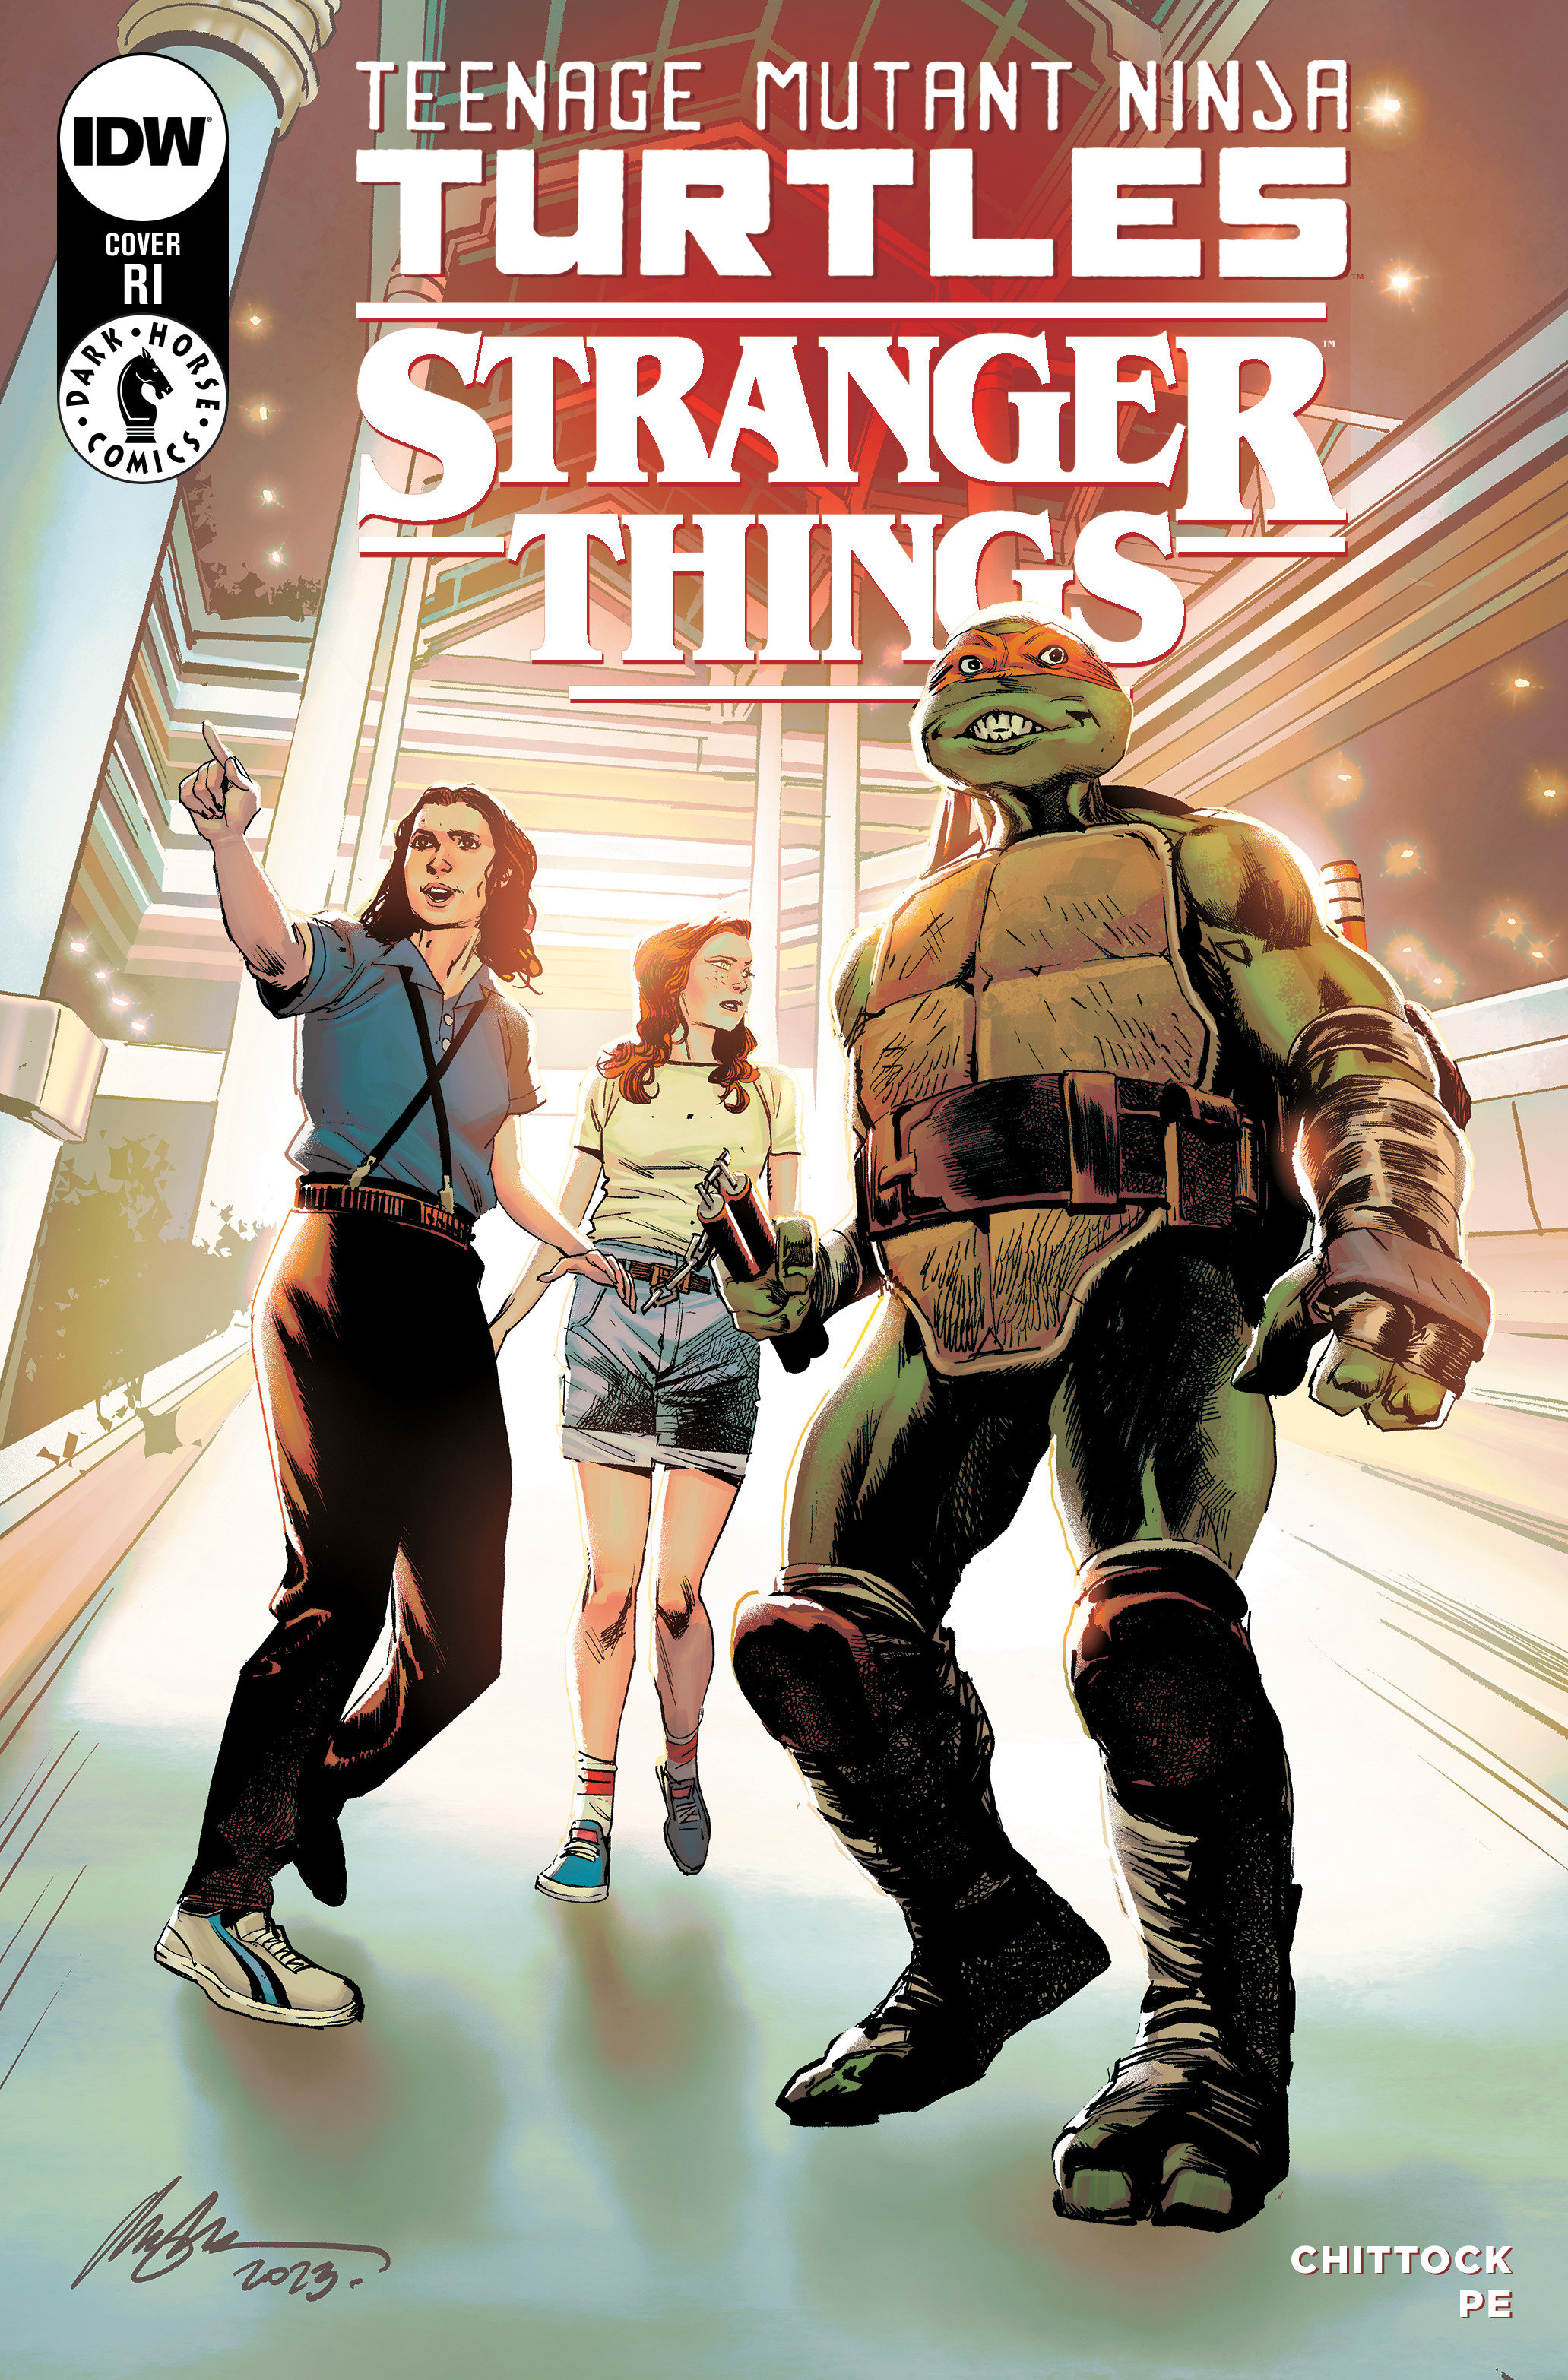 Teenage Mutant Ninja Turtles X Stranger Things #1 Cover F 1 for 50 Incentive Albuquerque